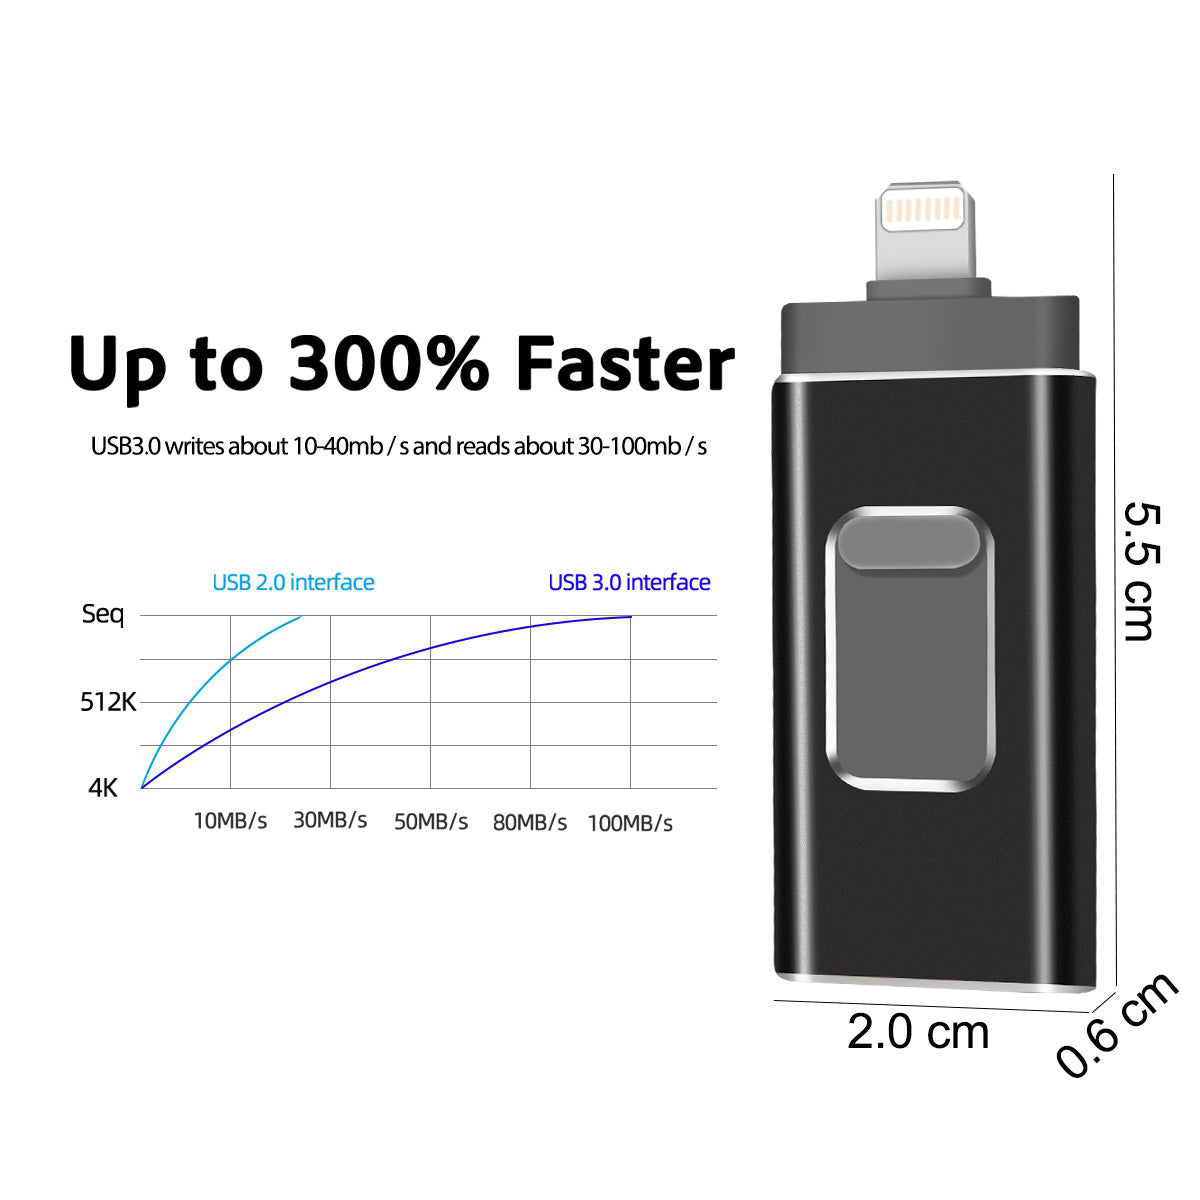 RICHWELL R-01B 16GB 3 in 1 Photo Stick for iPhone Android PC, Plug and Play USB 3.0 Flash Drive Memory Stick - Black